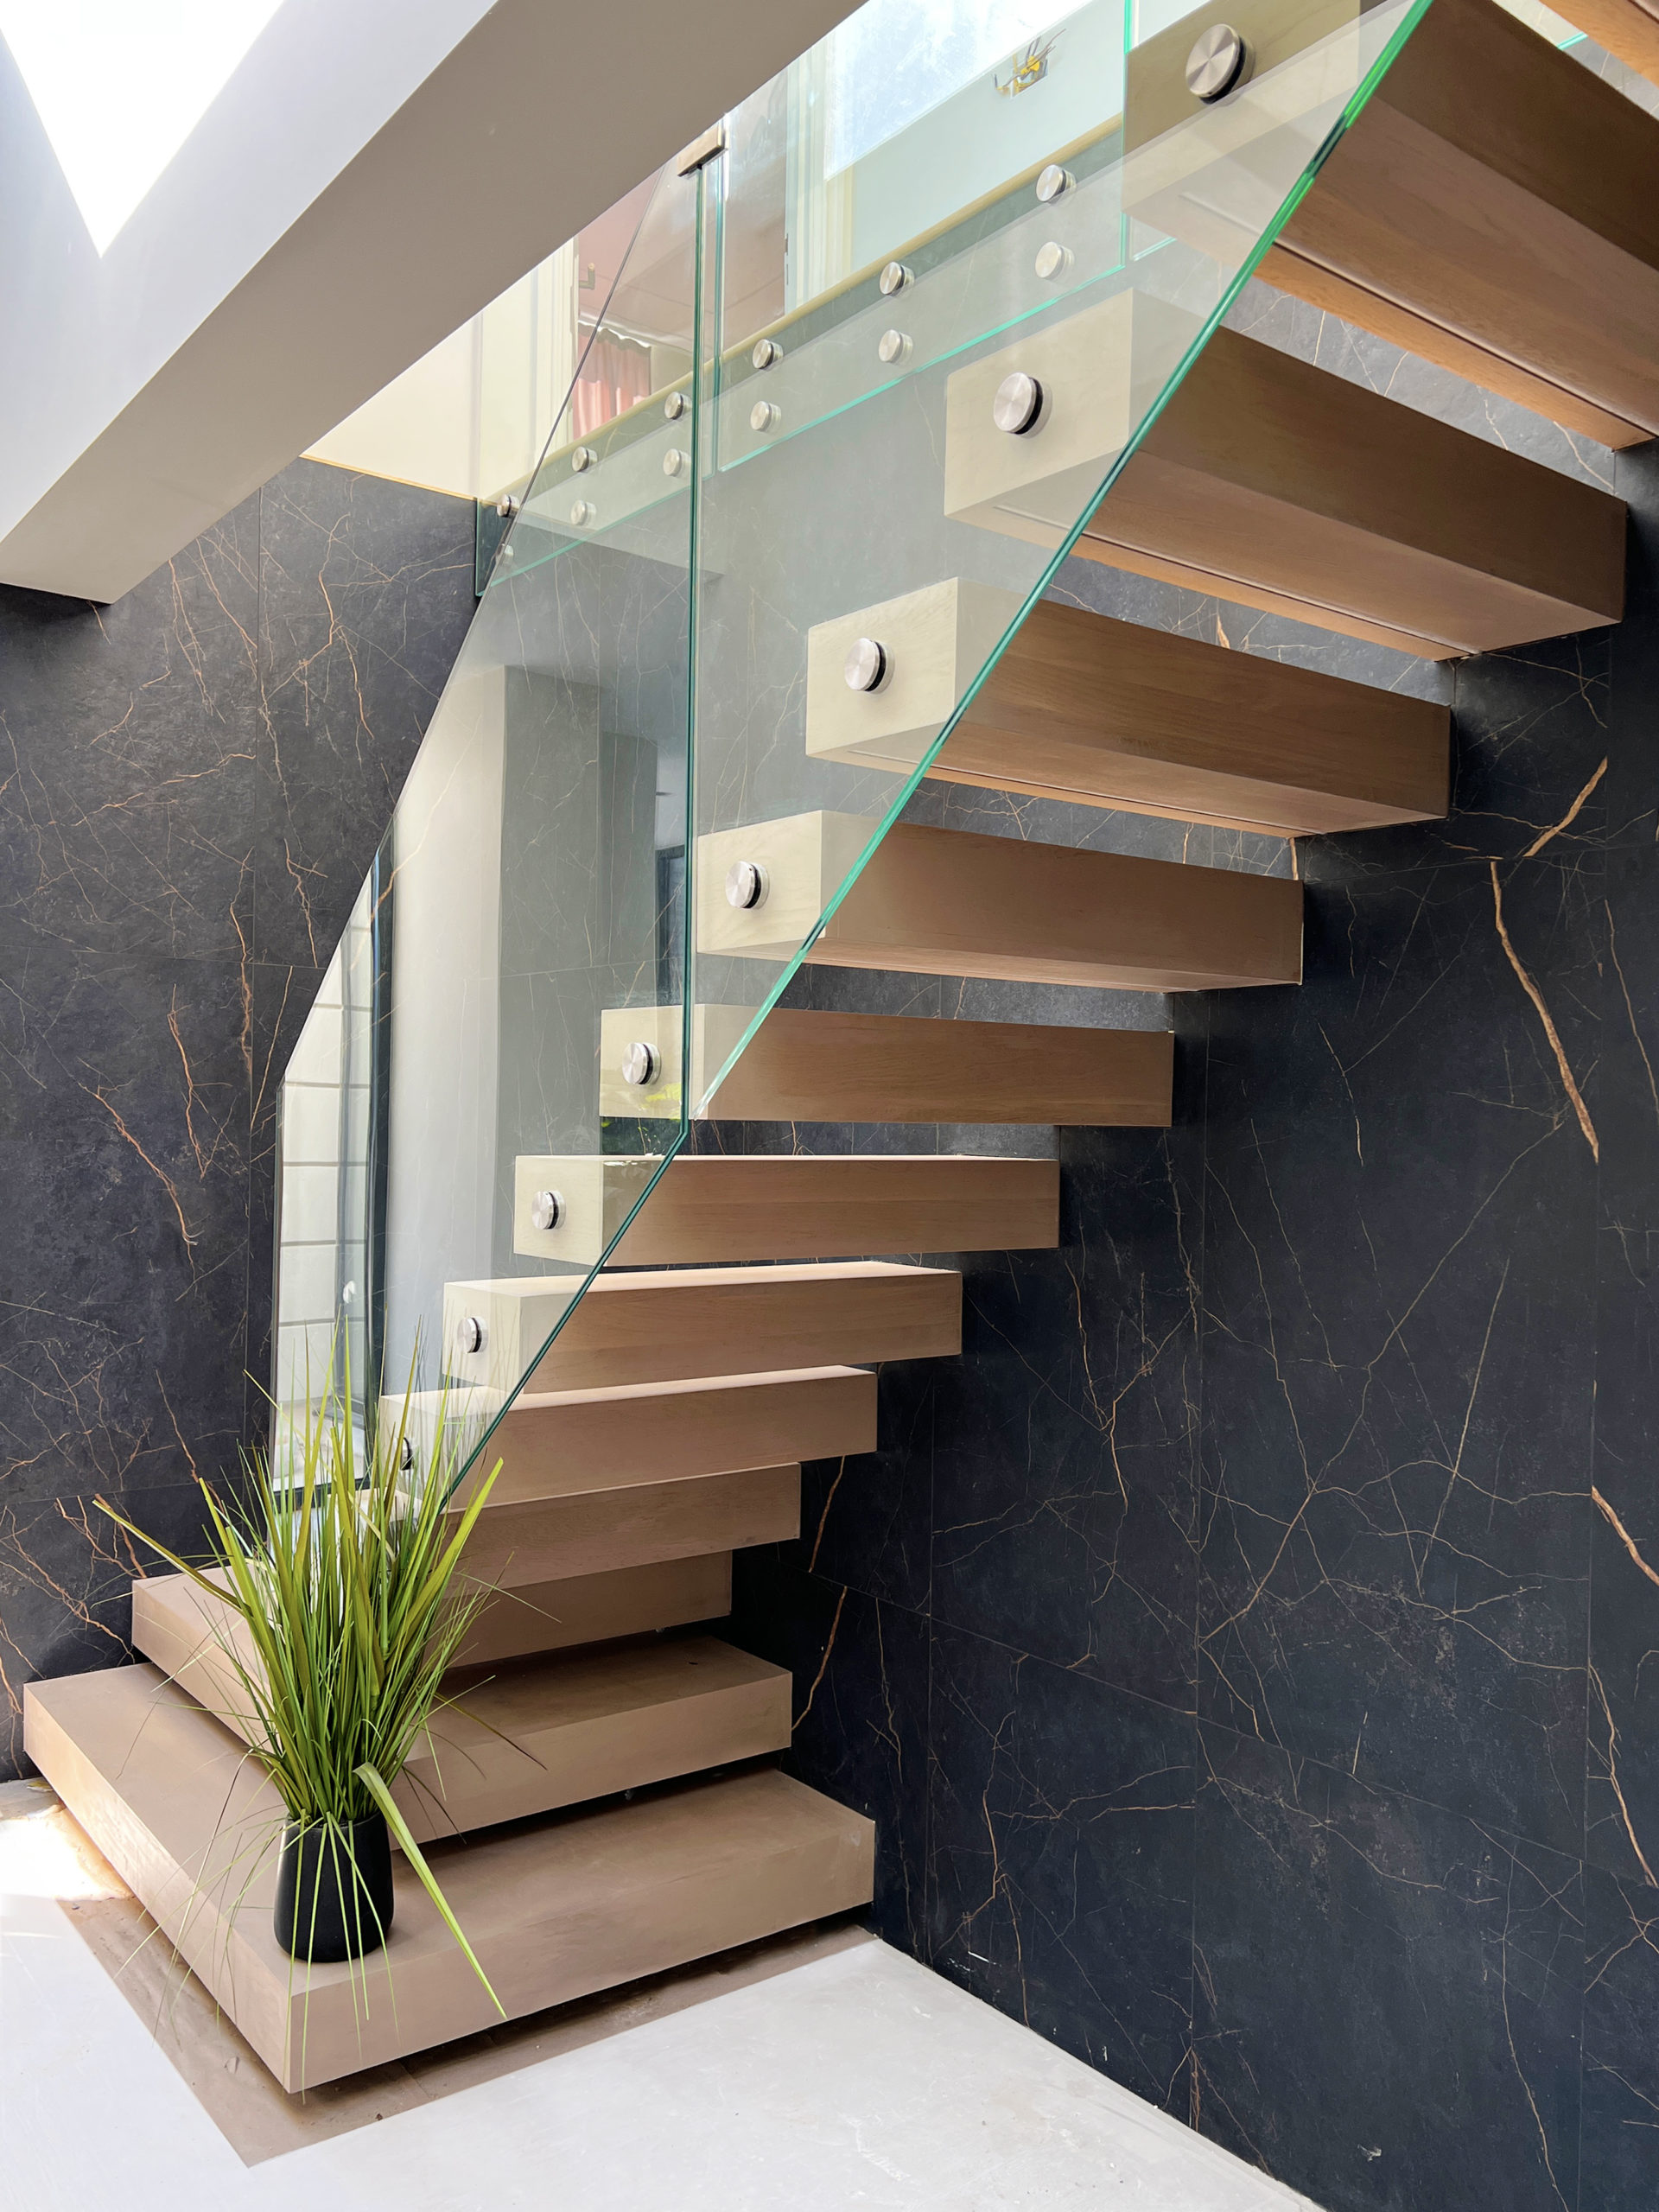 Floating staircase with frameless glass balustrade